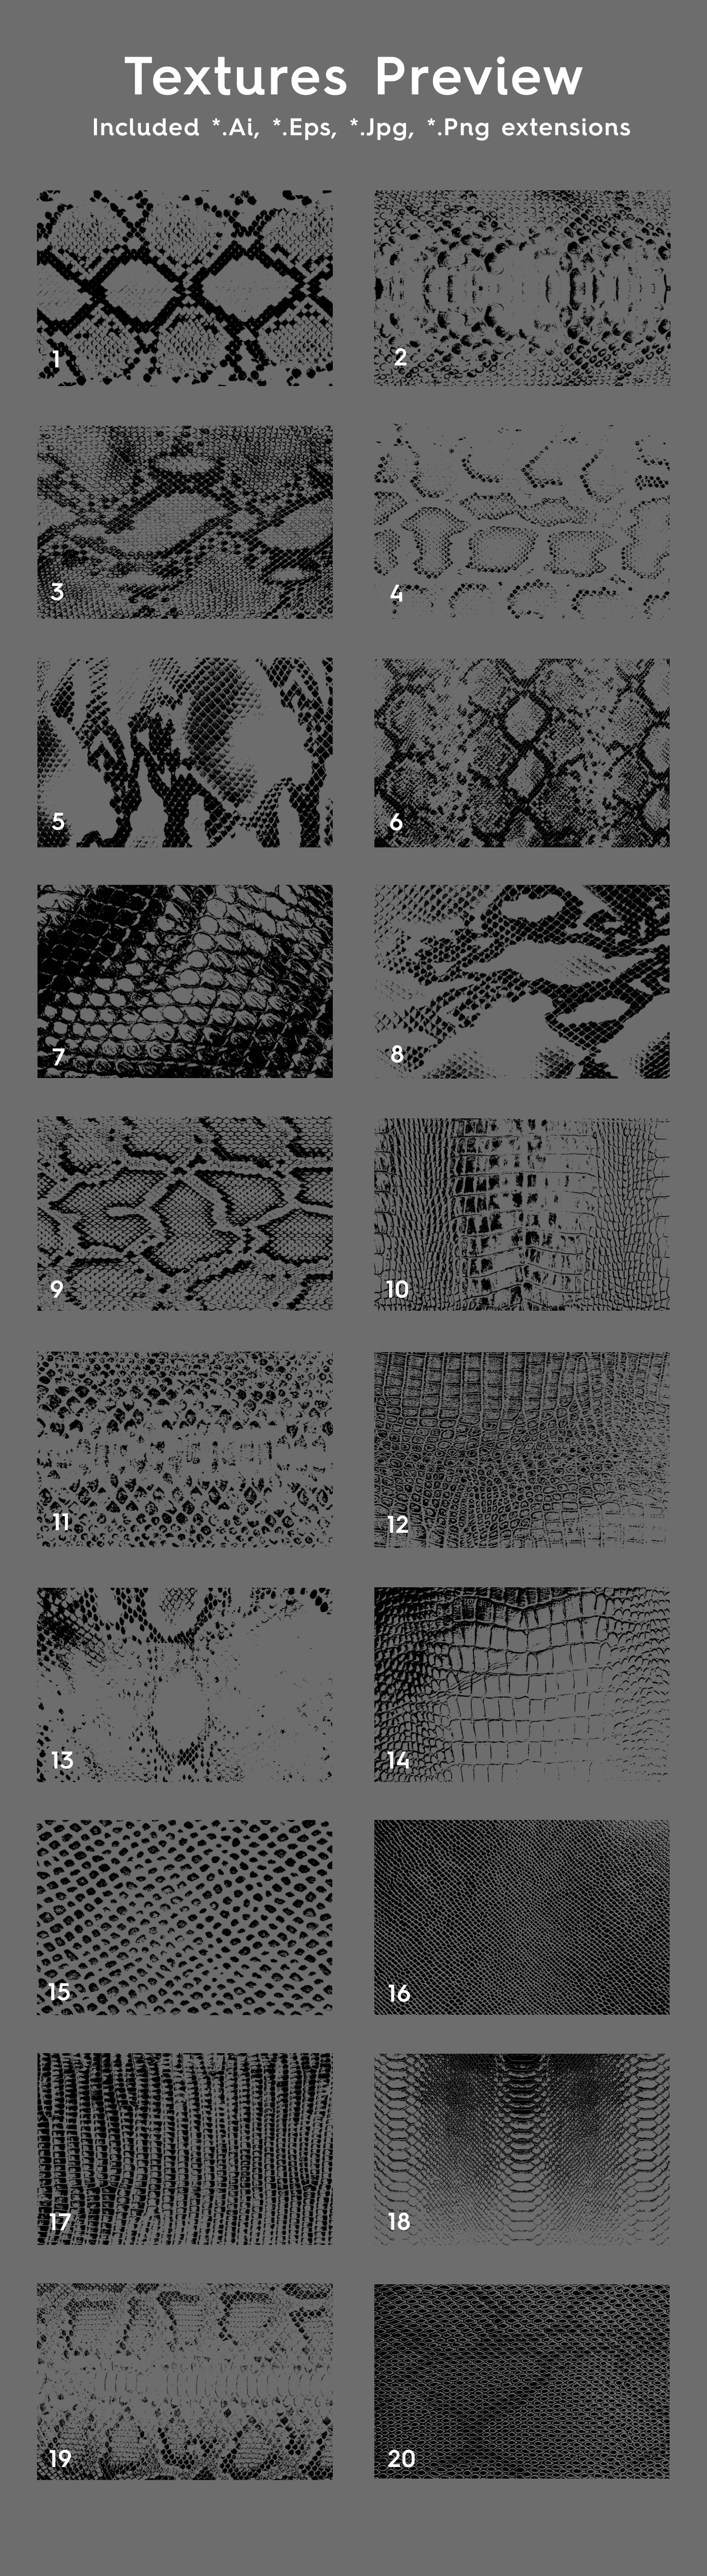 20 snake leather texture overlays textures preview 881